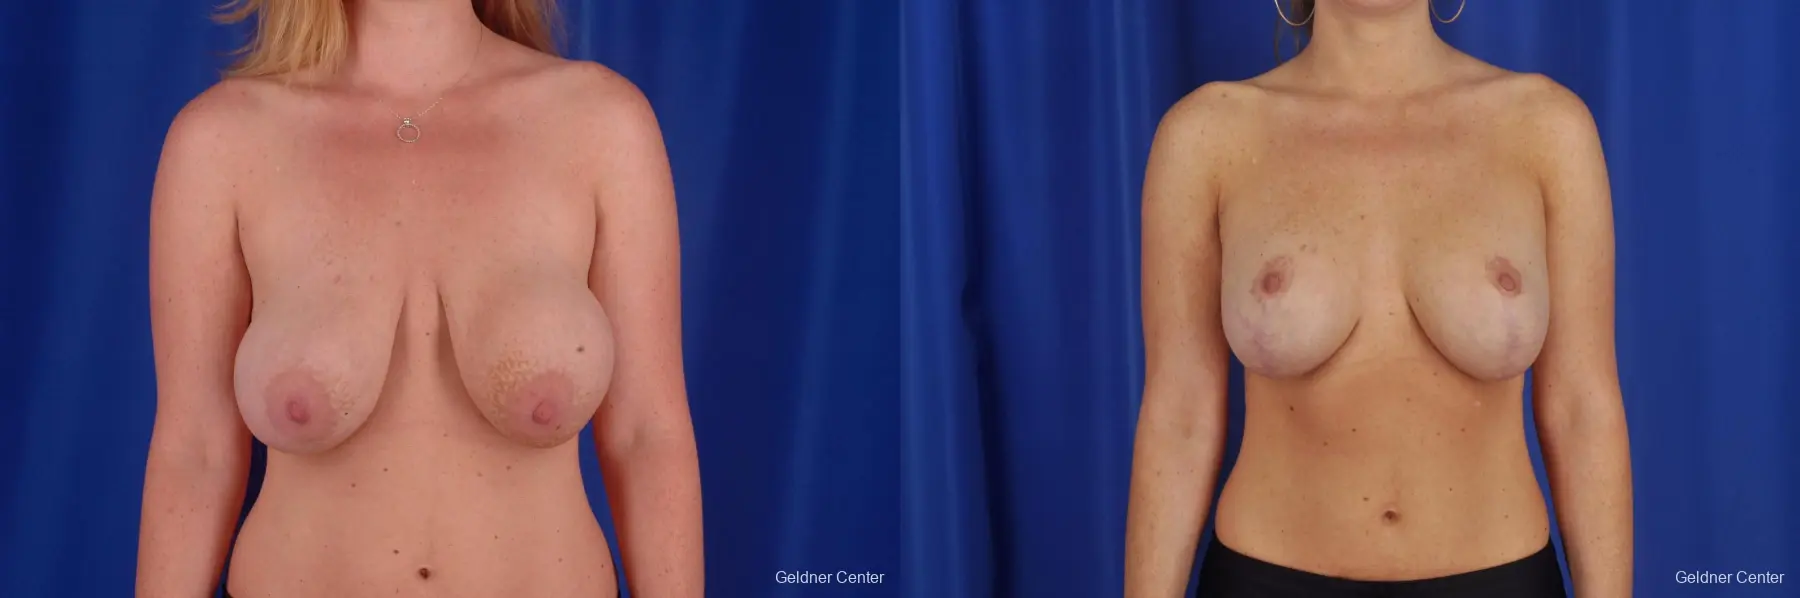 Breast Augmentation Steeterville, Chicago 2292 - Before and After 1